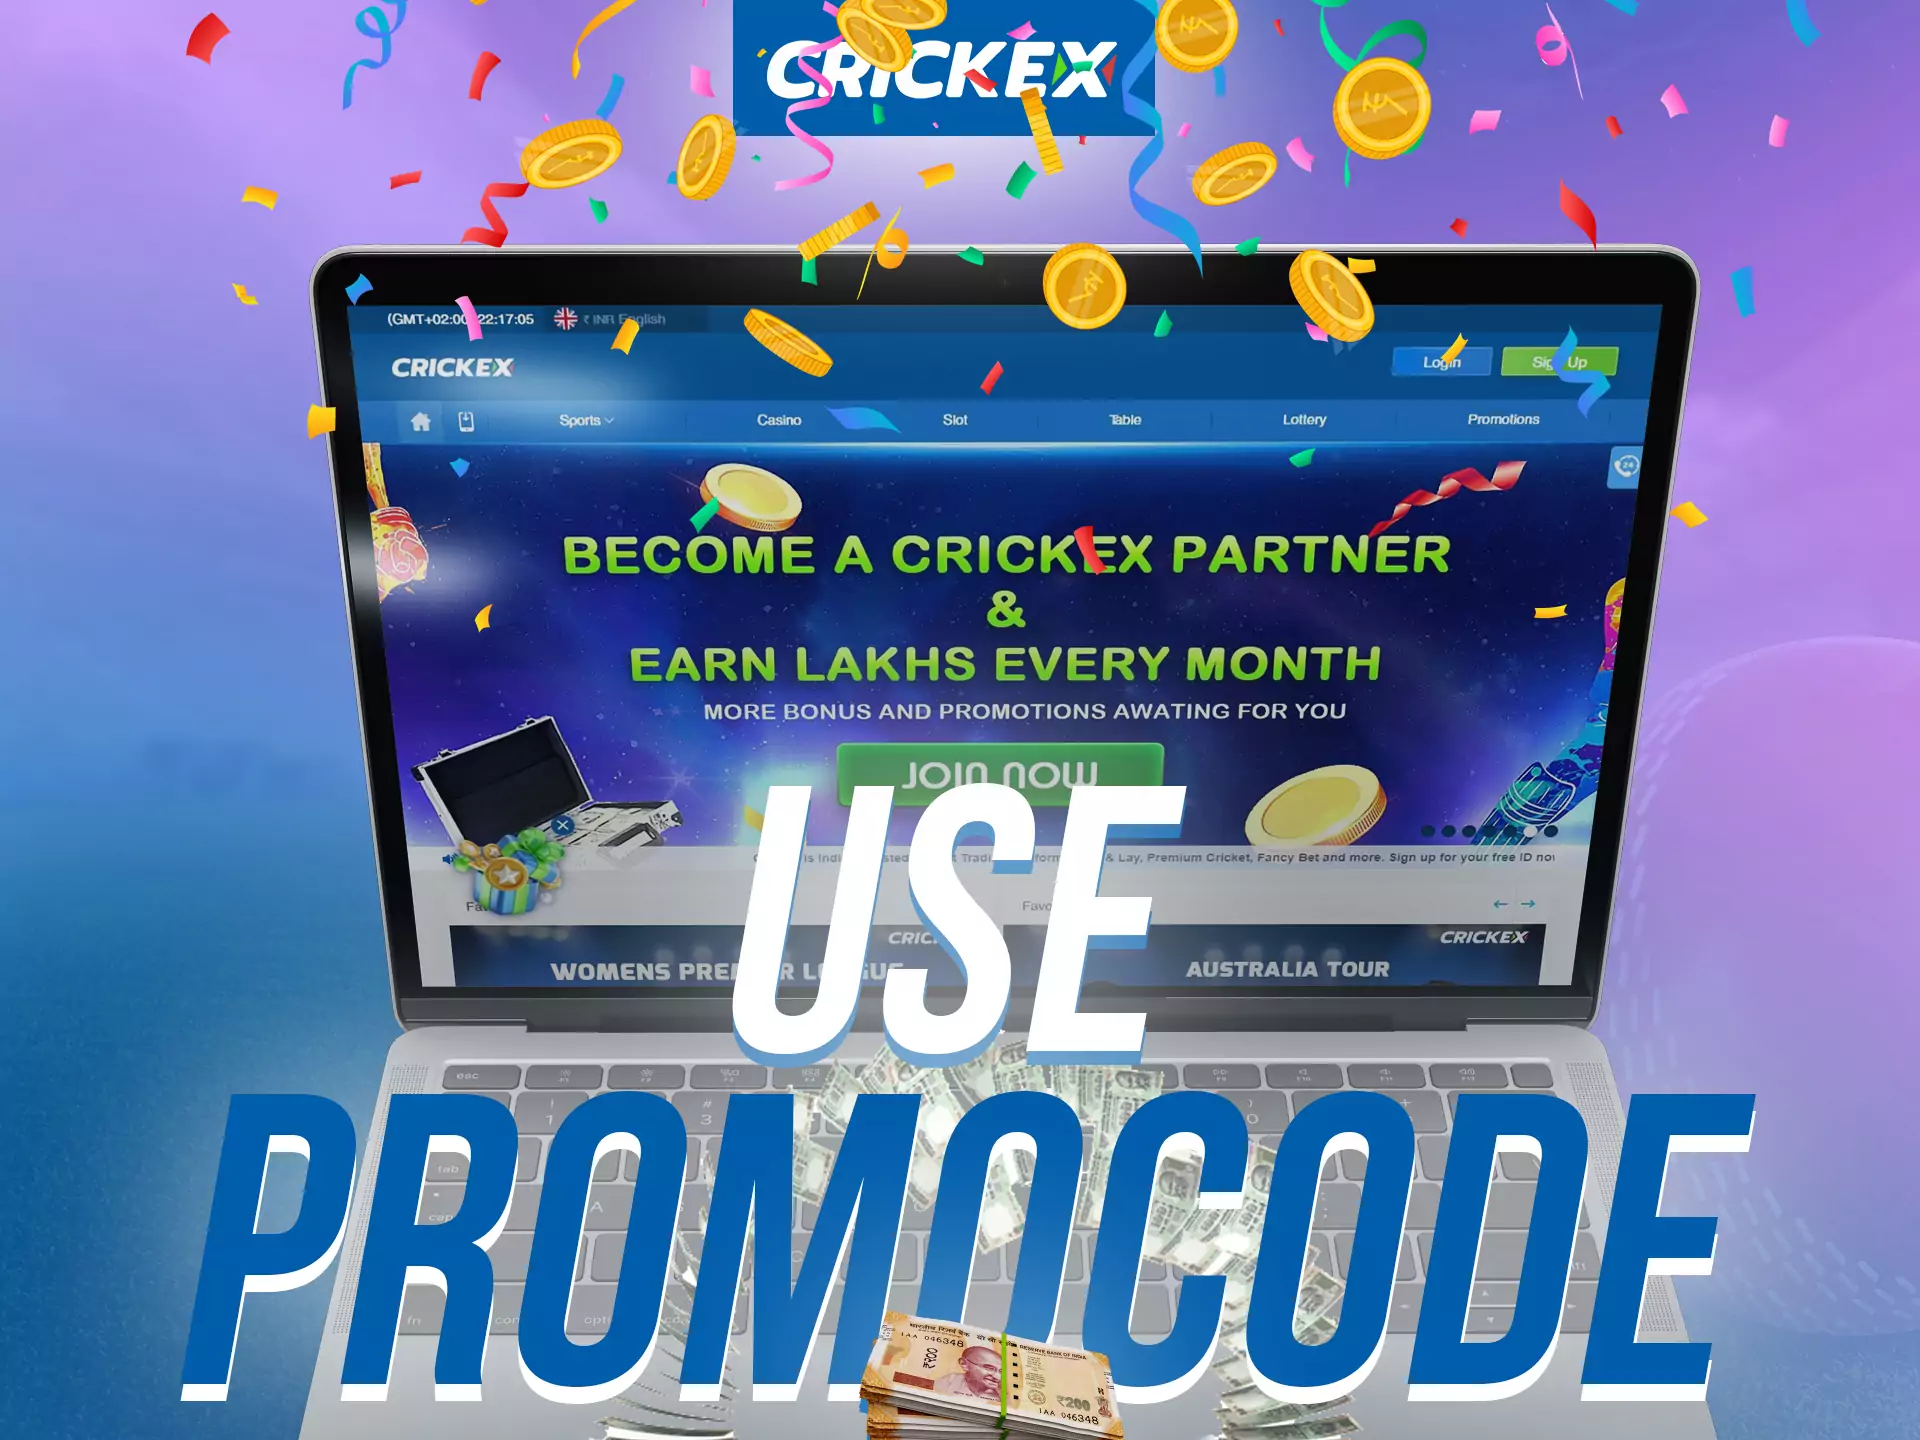 Use a special promo code for Crickex and get the benefits.